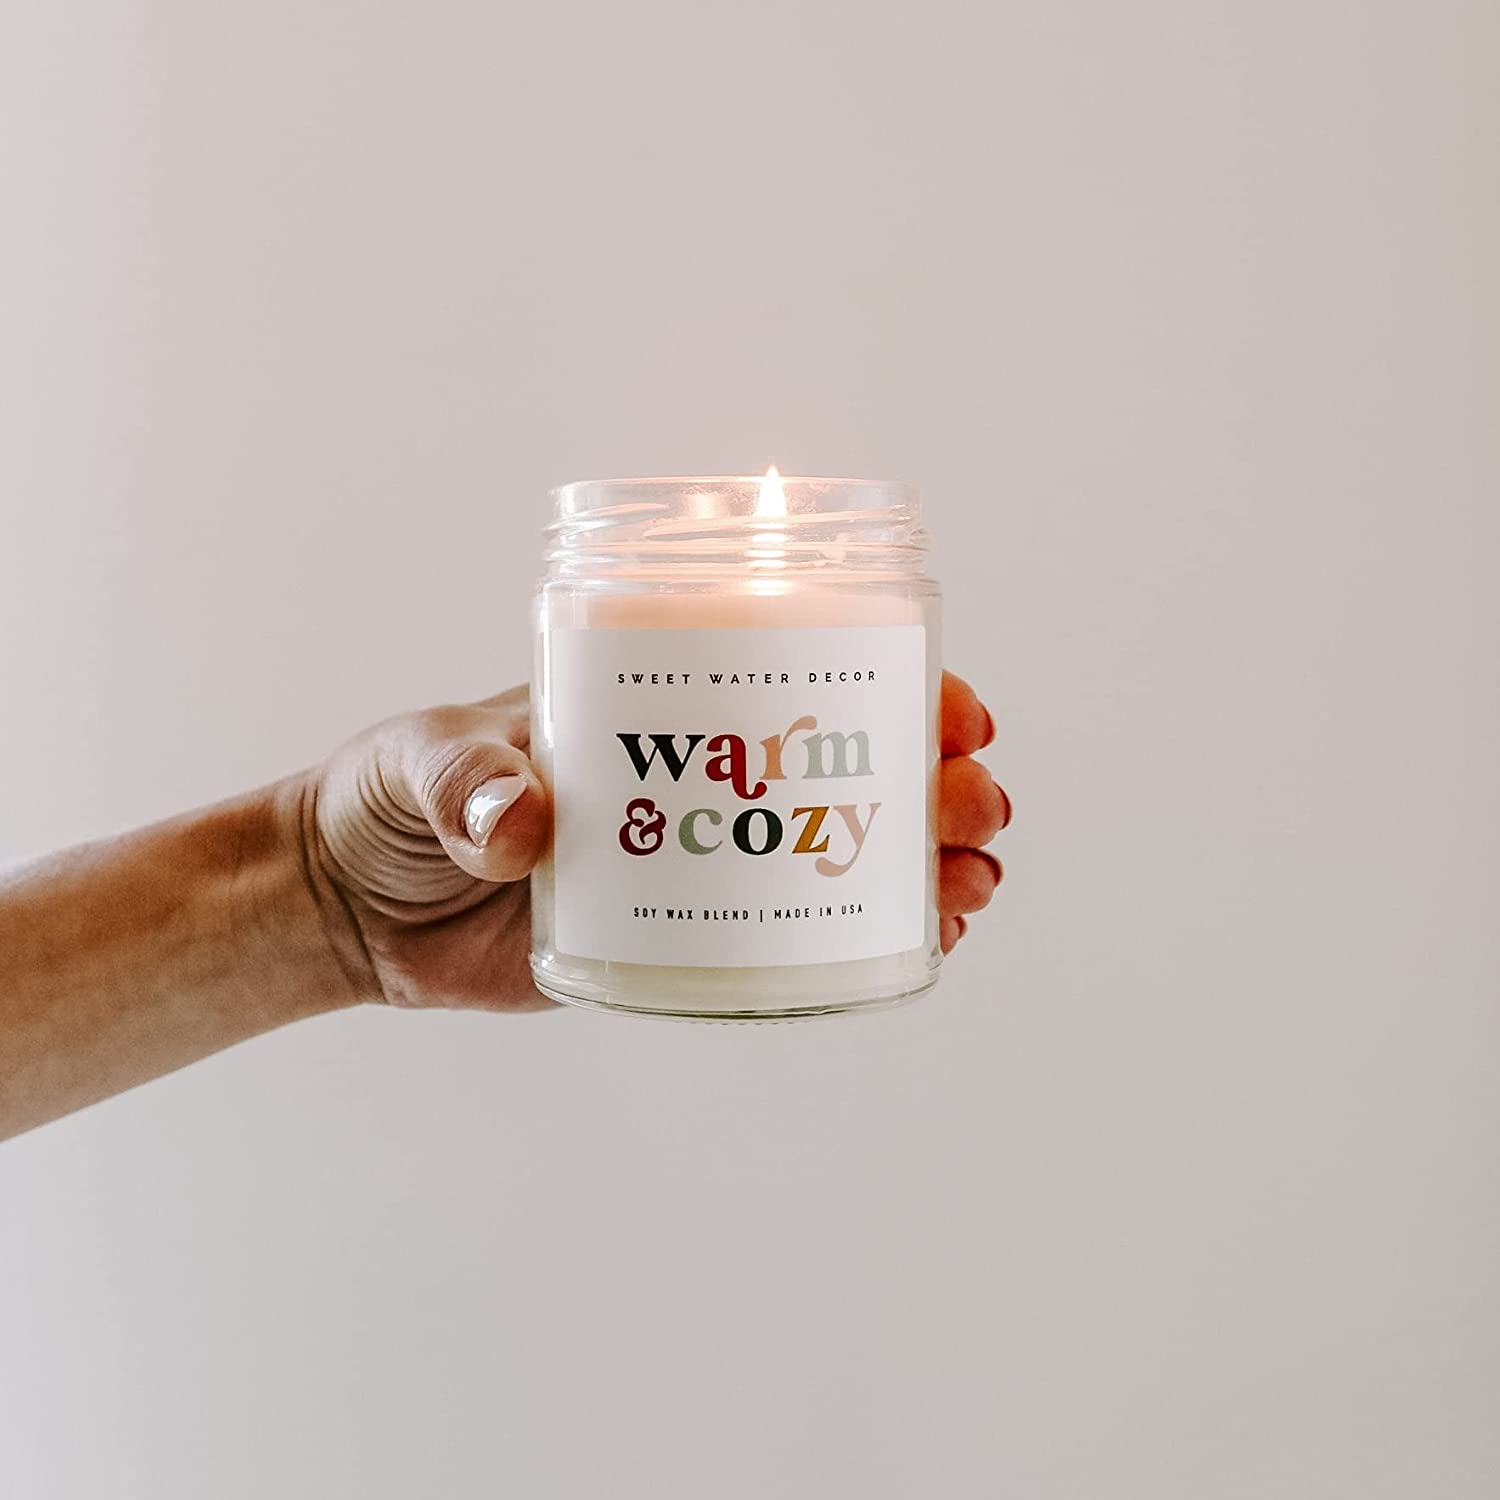 Sweet Water Decor Warm and Cozy Candle | Pine, Orange, Cinnamon, and Fir  Winter Scented Soy Candles for Home | 9oz Clear Jar, 40 Hour Burn Time,  Made